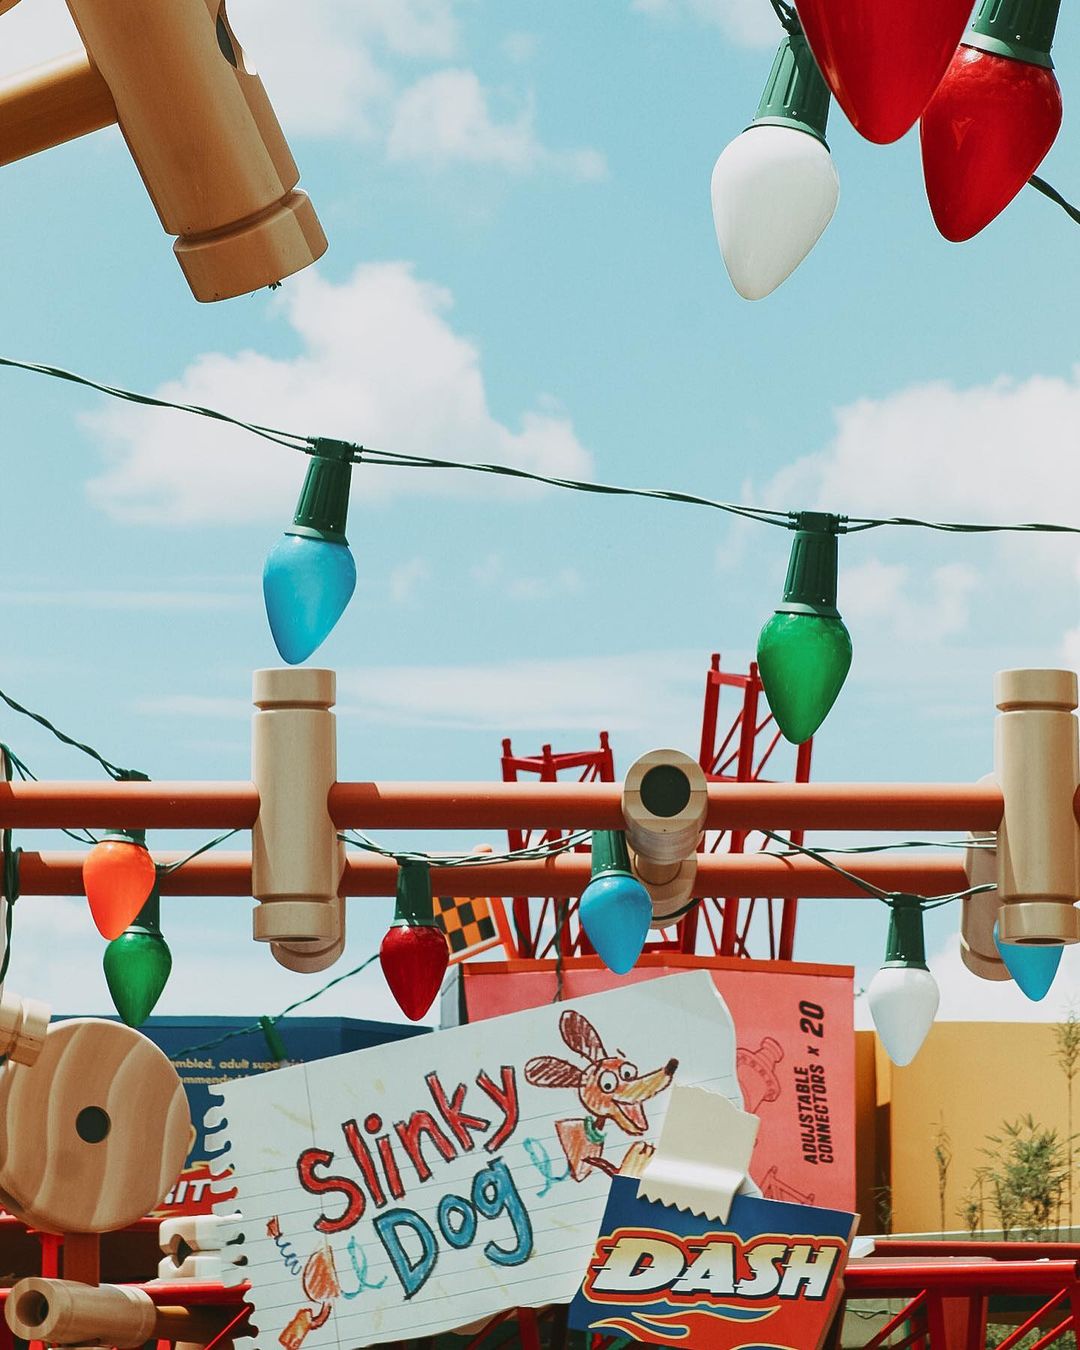 Toy Story Land themed at Hollywood Studios